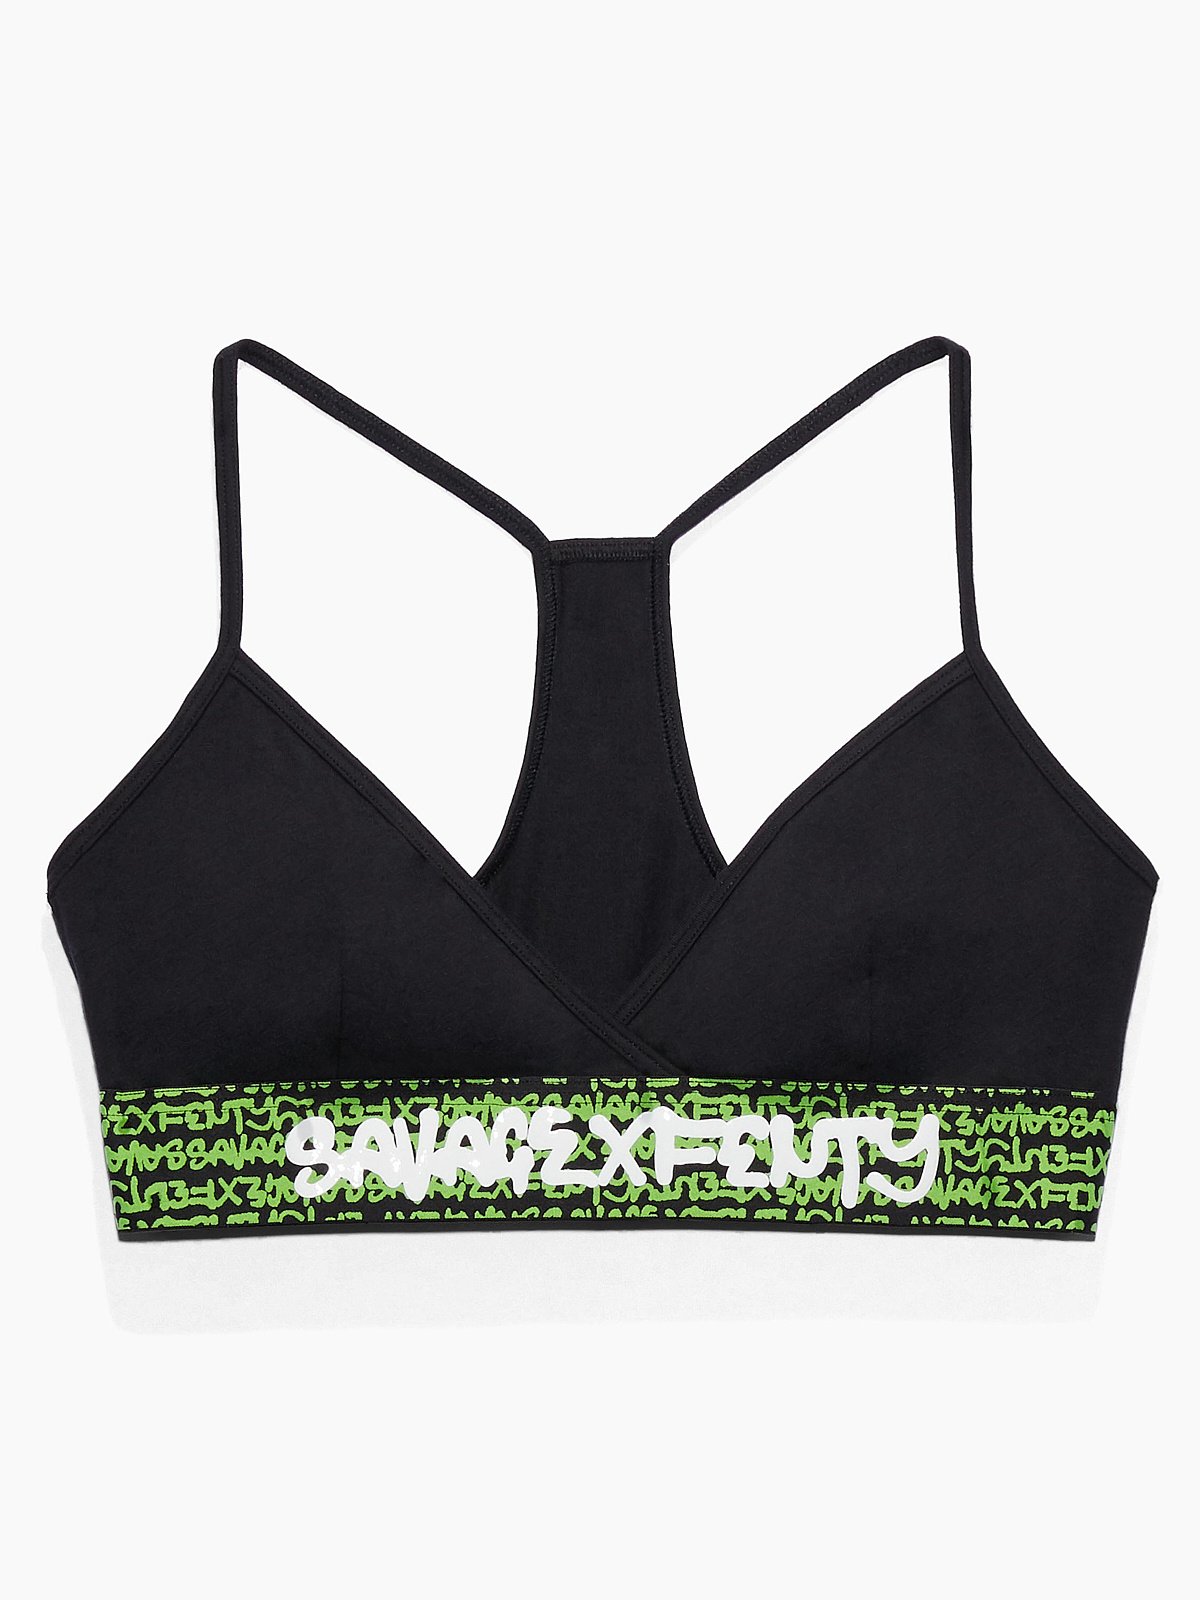 Savage X Fenty Forever Savage Bralette - Gray/Black - 2X Size undefined -  $20 - From Samantha